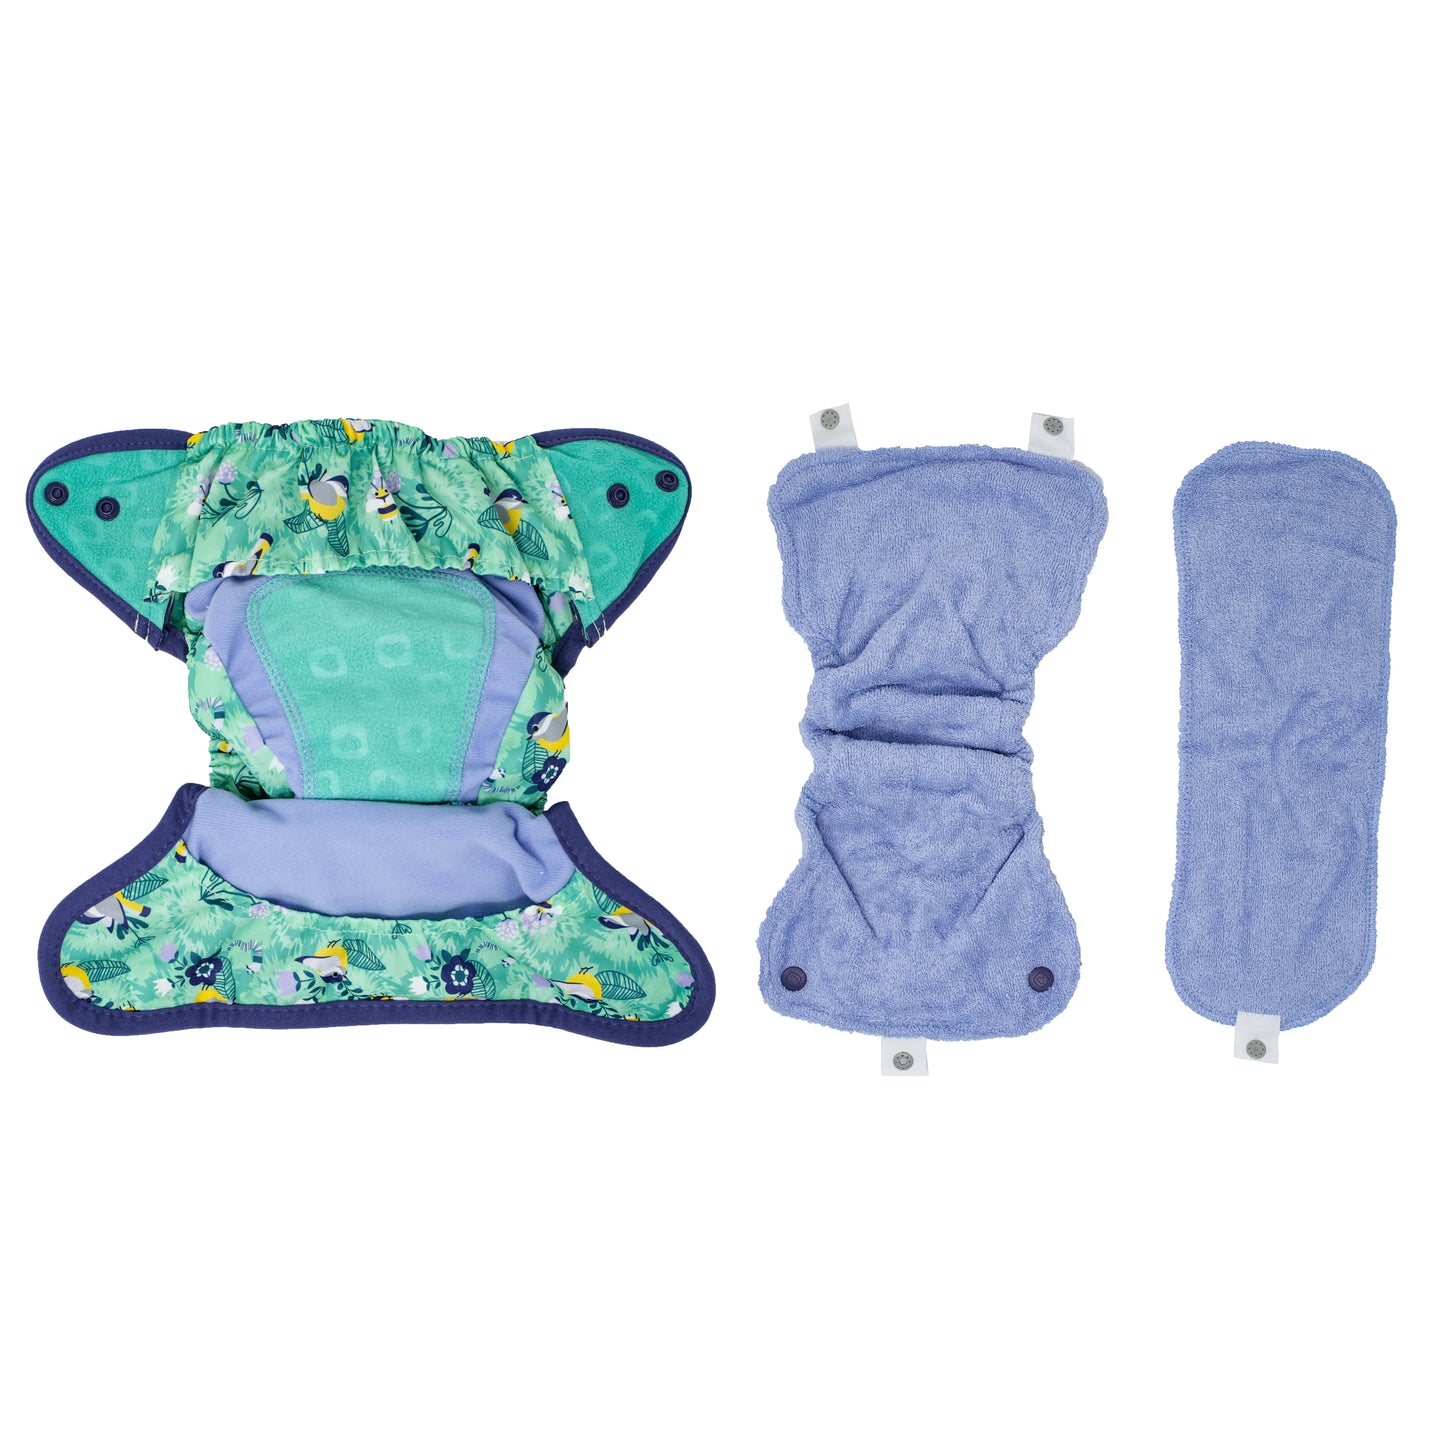 Parts Of Green Blue Pop-in One Size Around The Garden Reusable Cloth Nappy, With Popper Fastening